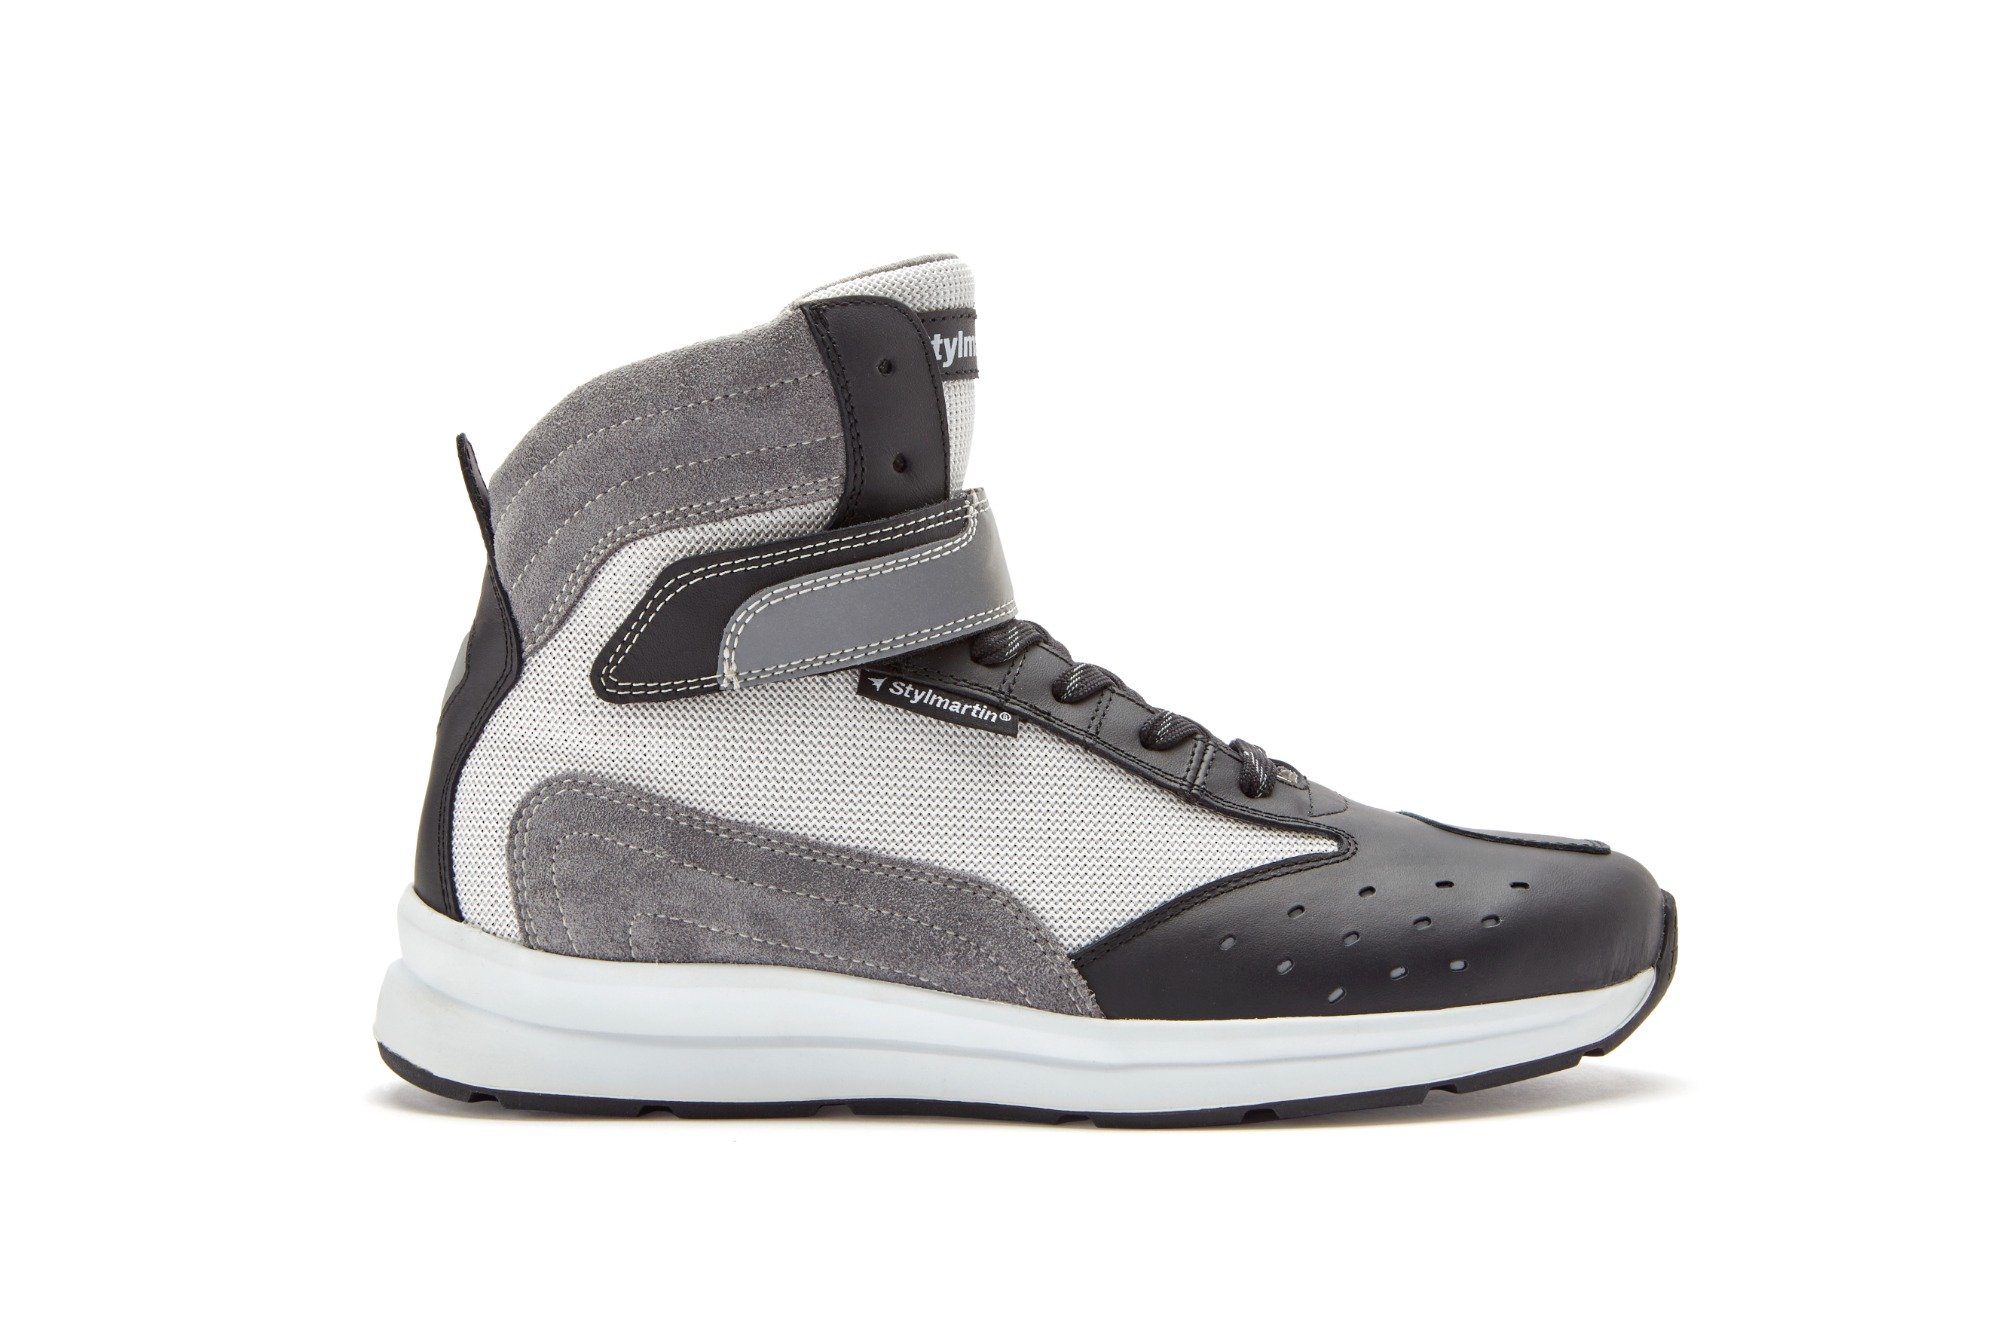 Image of Stylmartin Audax Air Black Anthracite White Size 44 ID 1000001309361